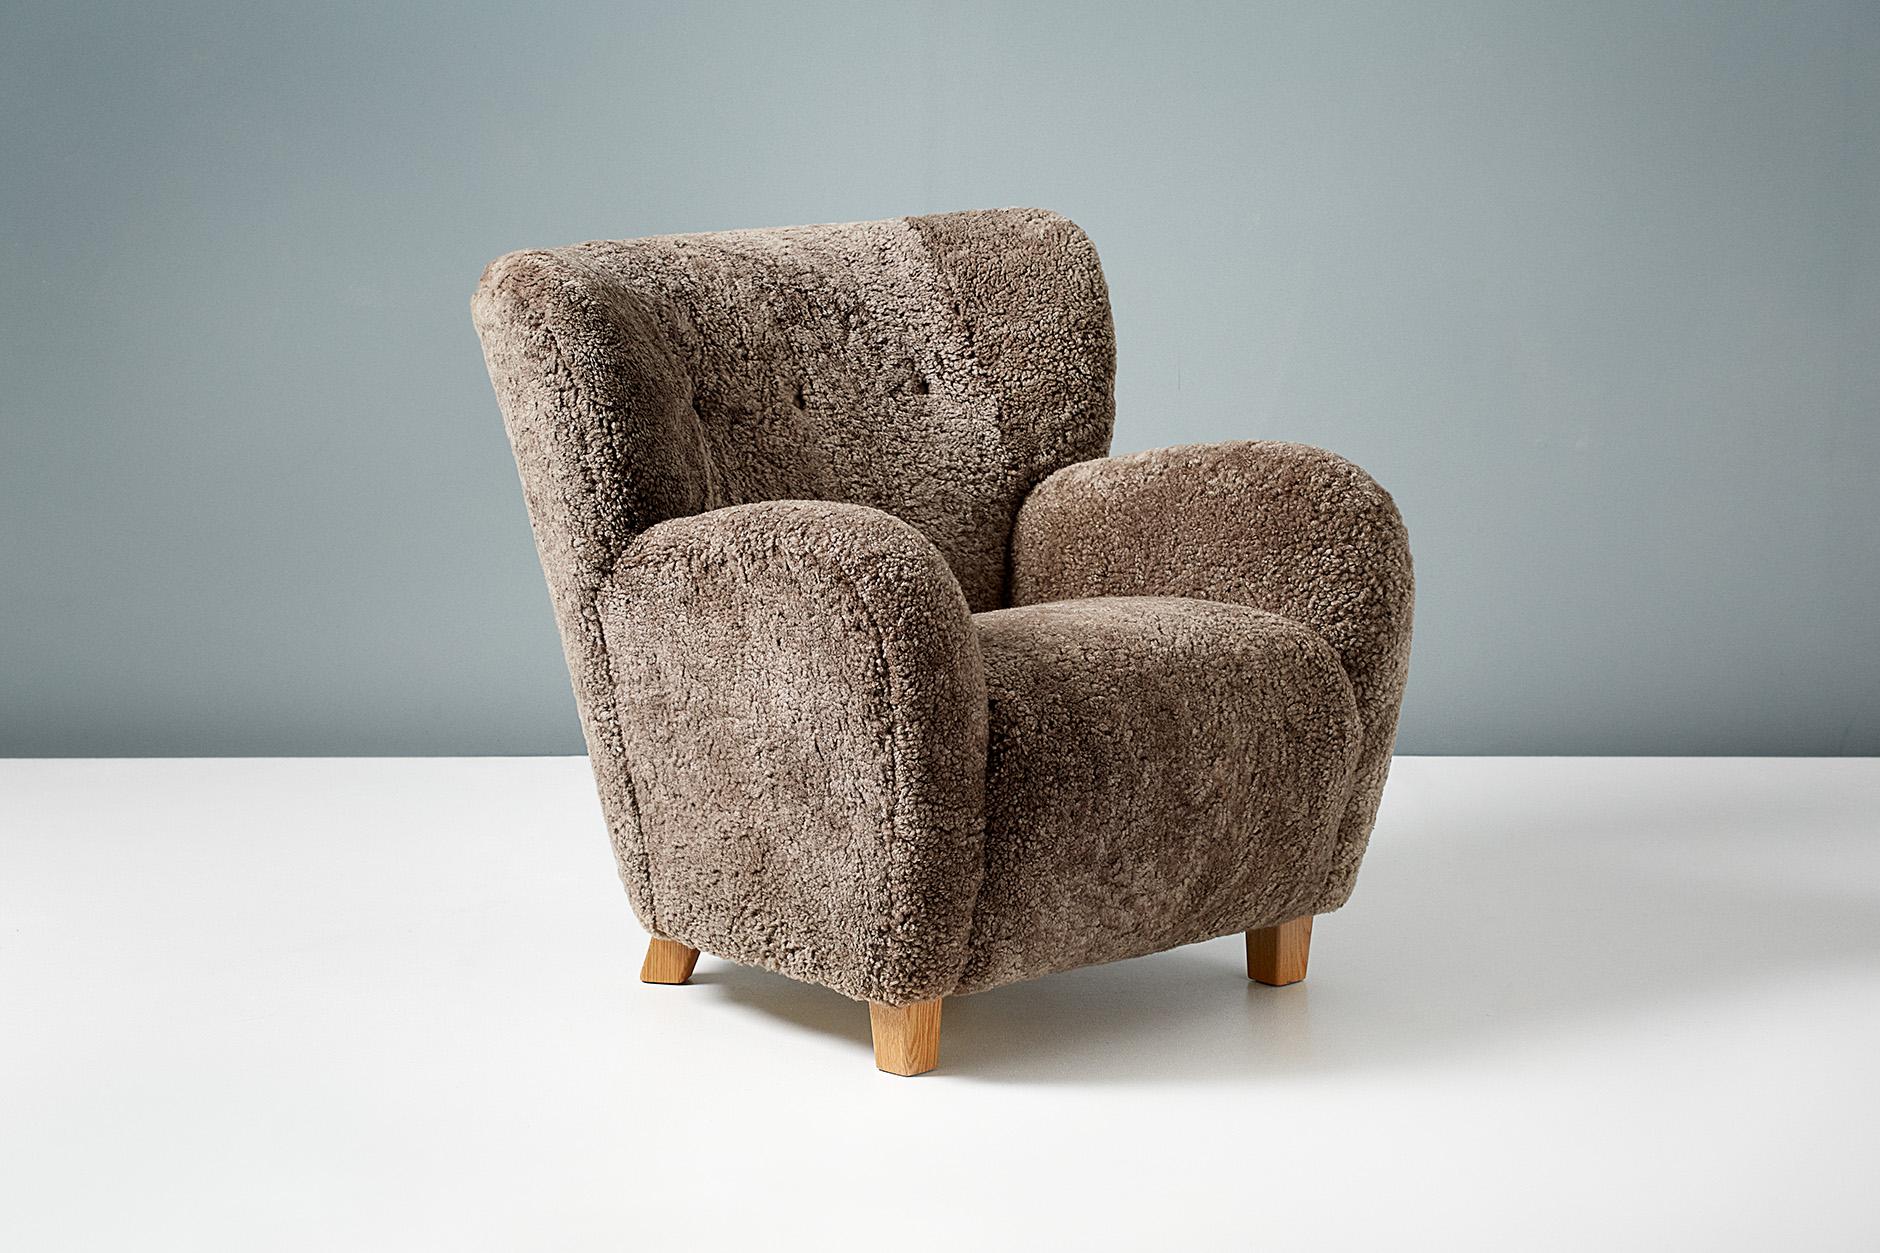 shearling chair and ottoman